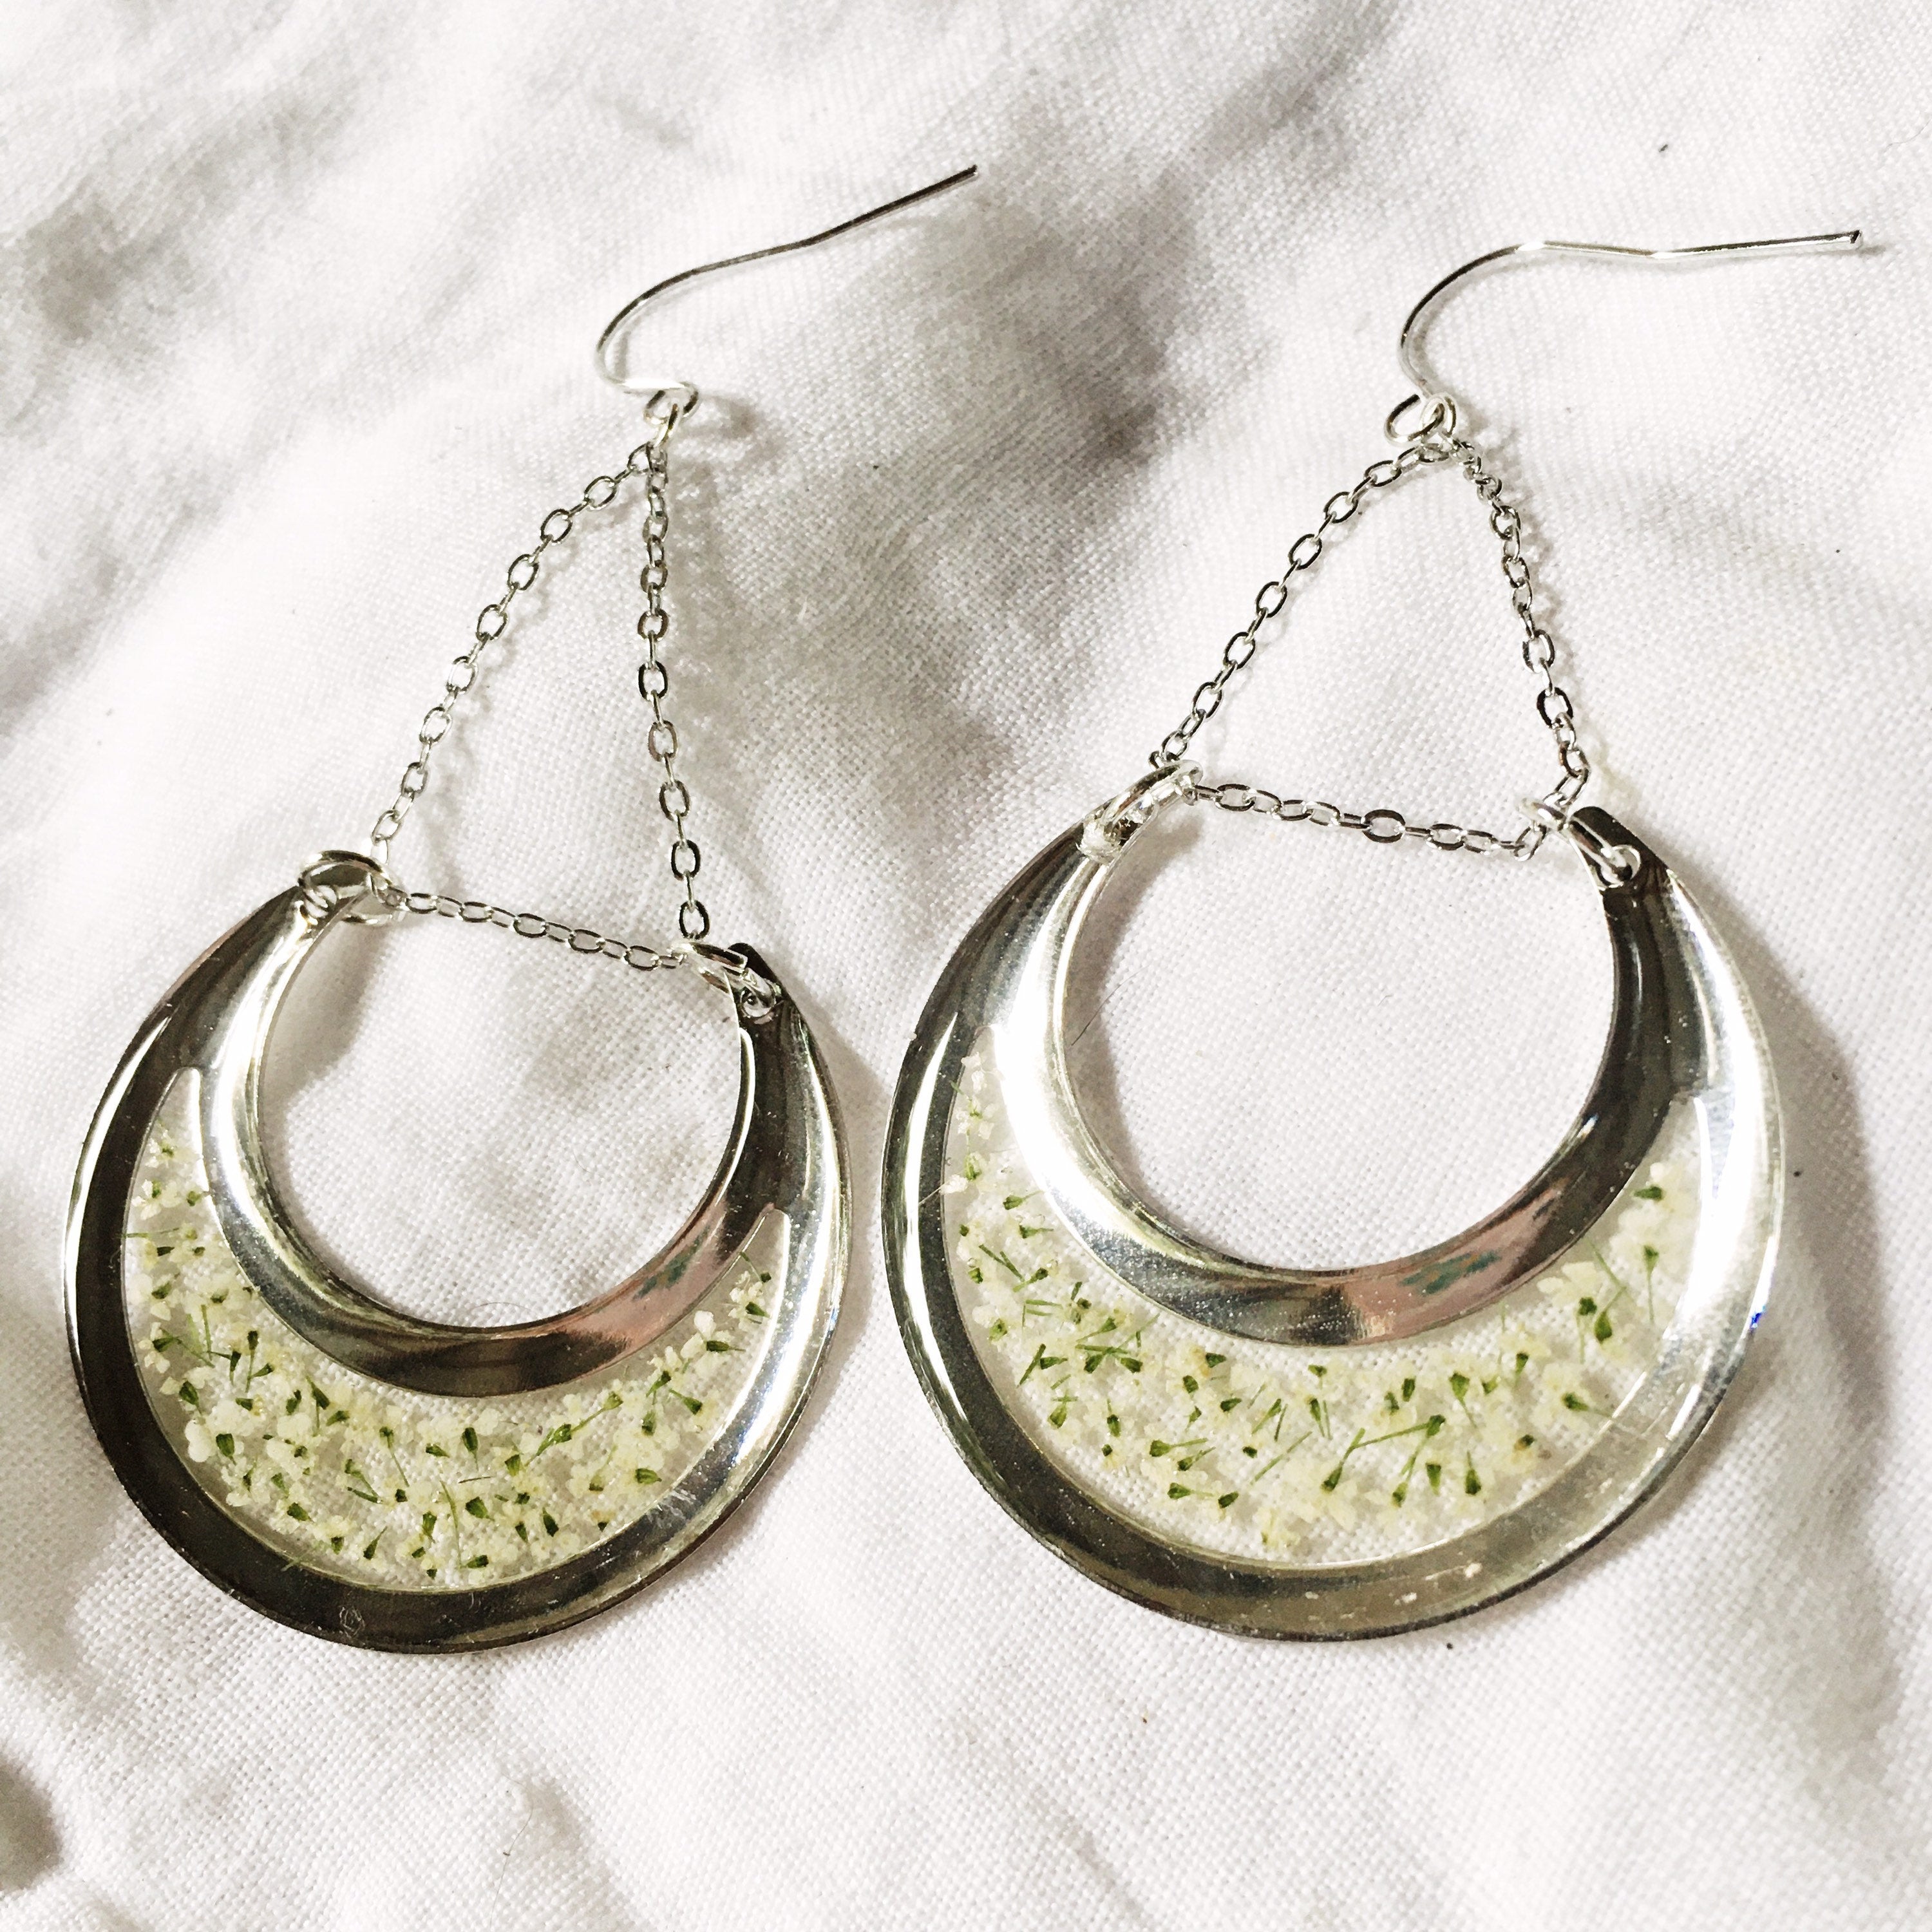 Crescent City Chic - Silver Crescent Moon Earrings with Queen Anne's Lace